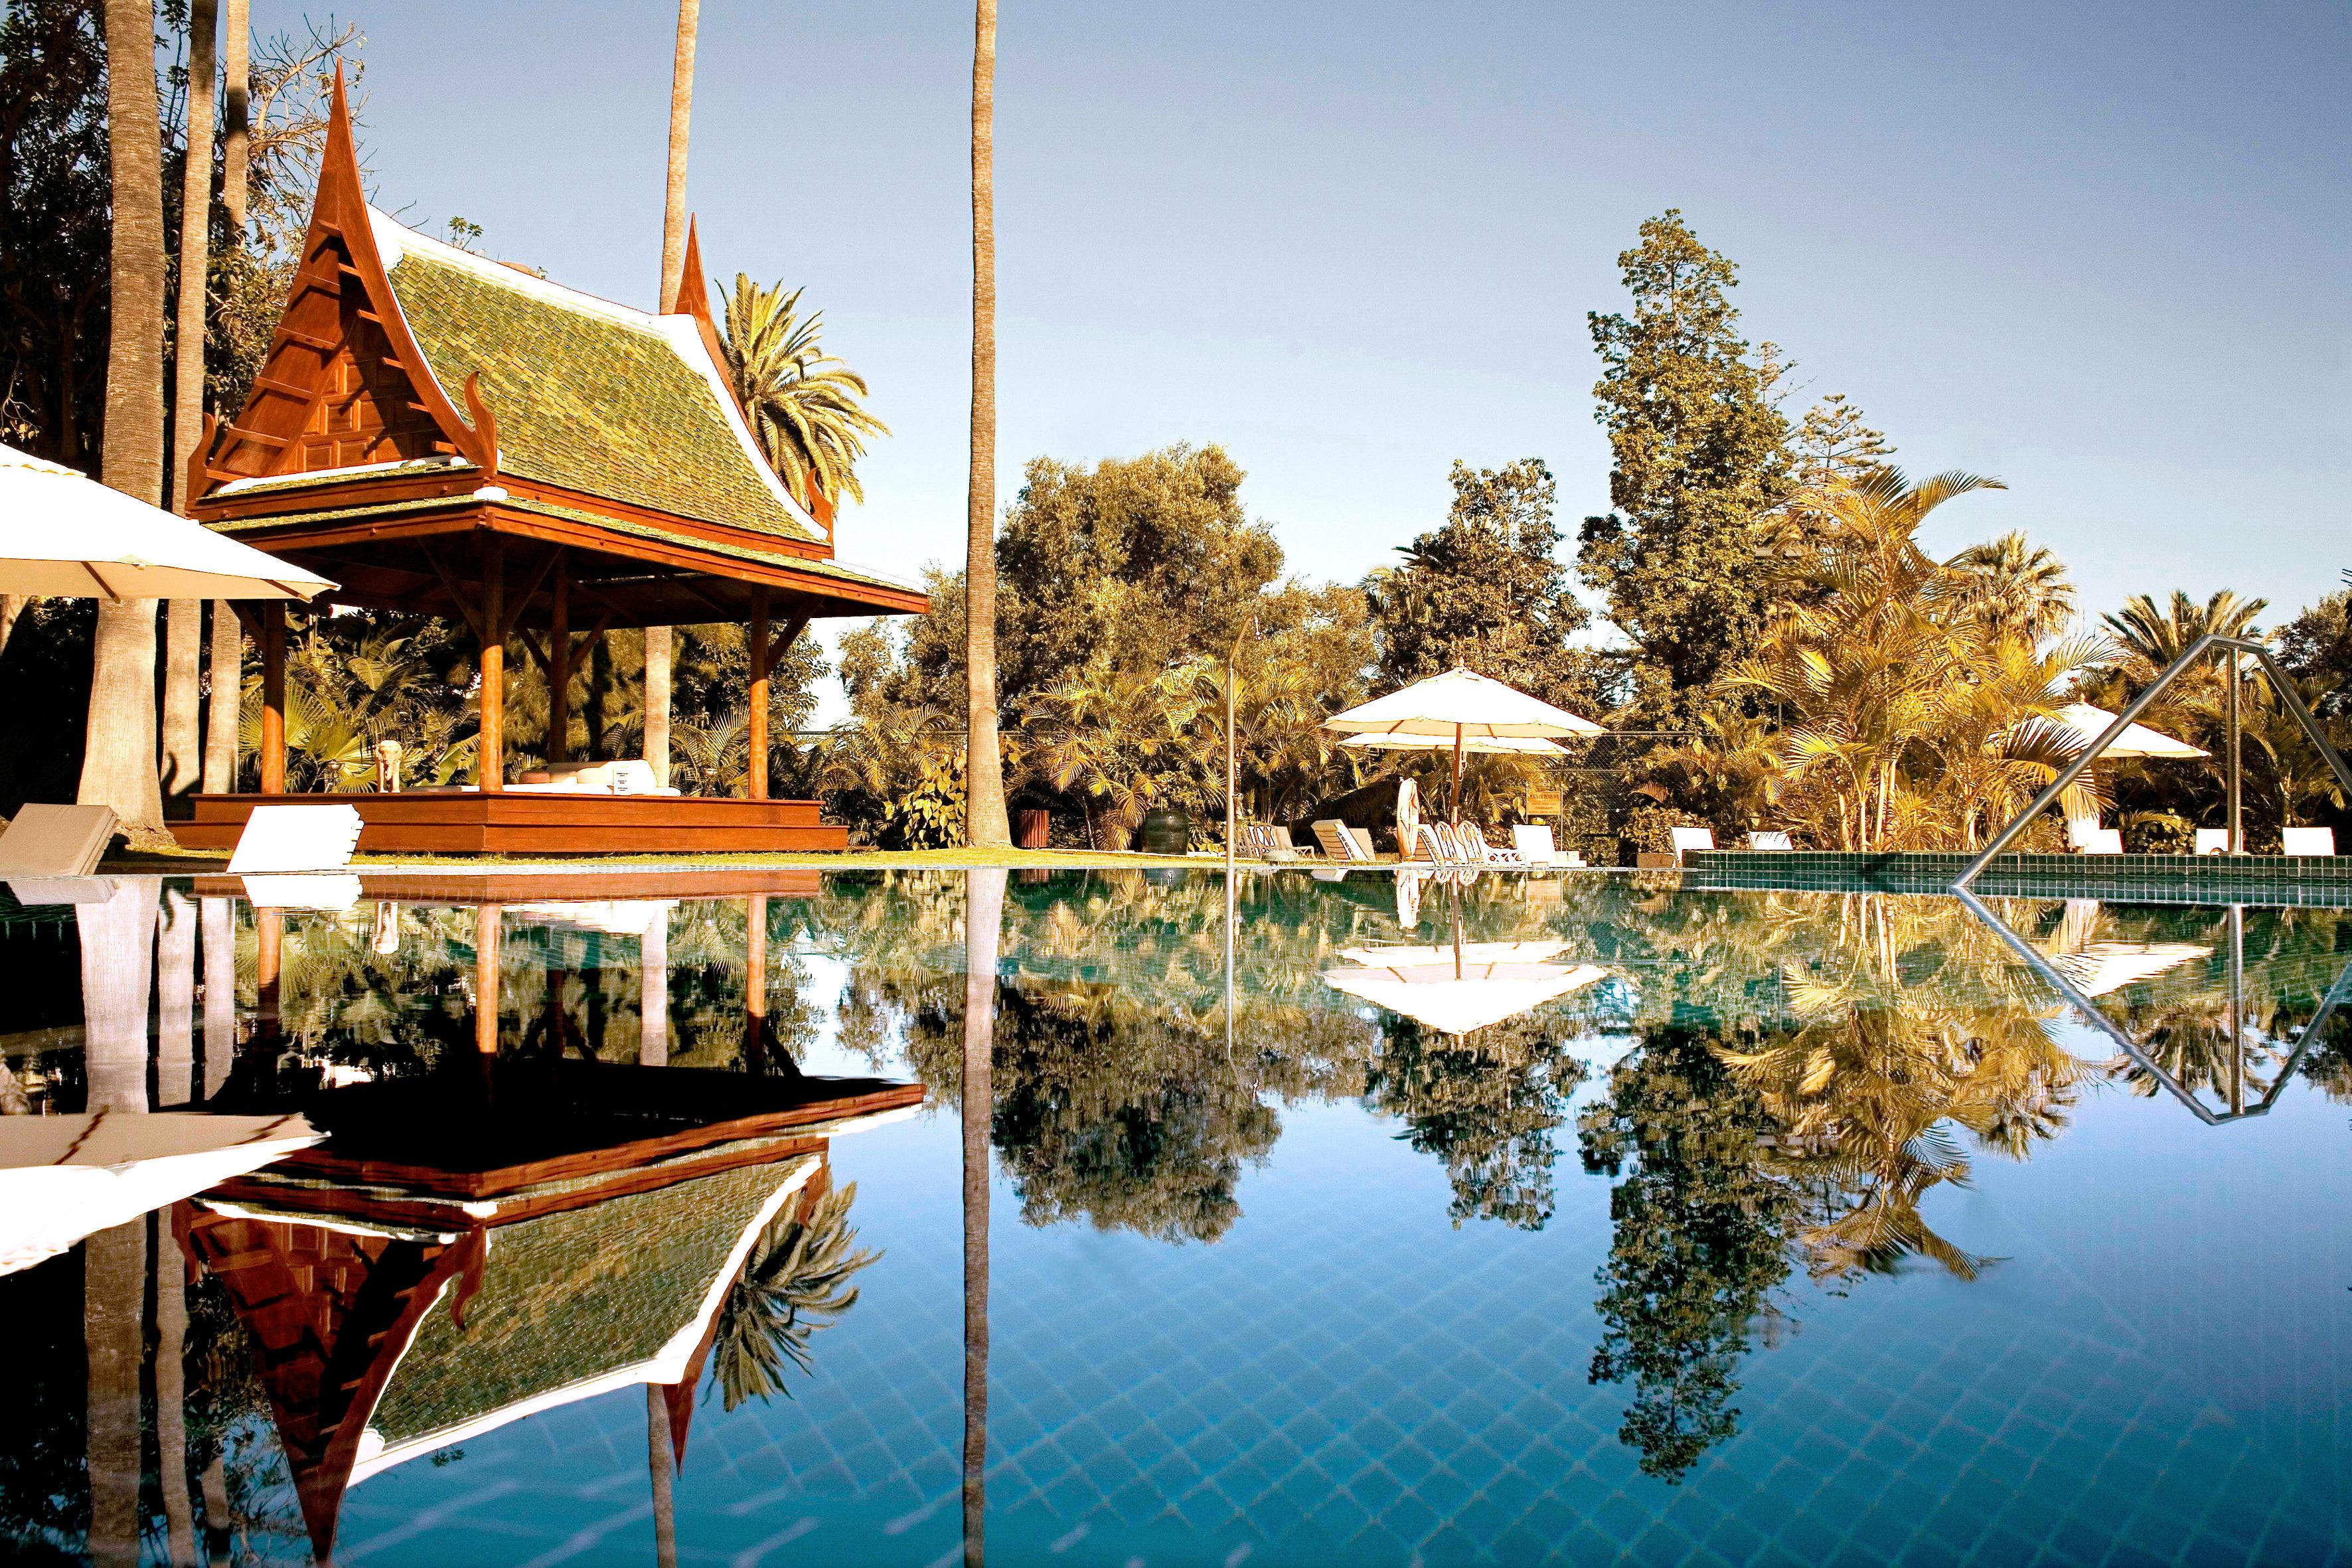 Luxury holidays for families at Hotel Botanico and the Oriental Spa Gardens, Tenerife